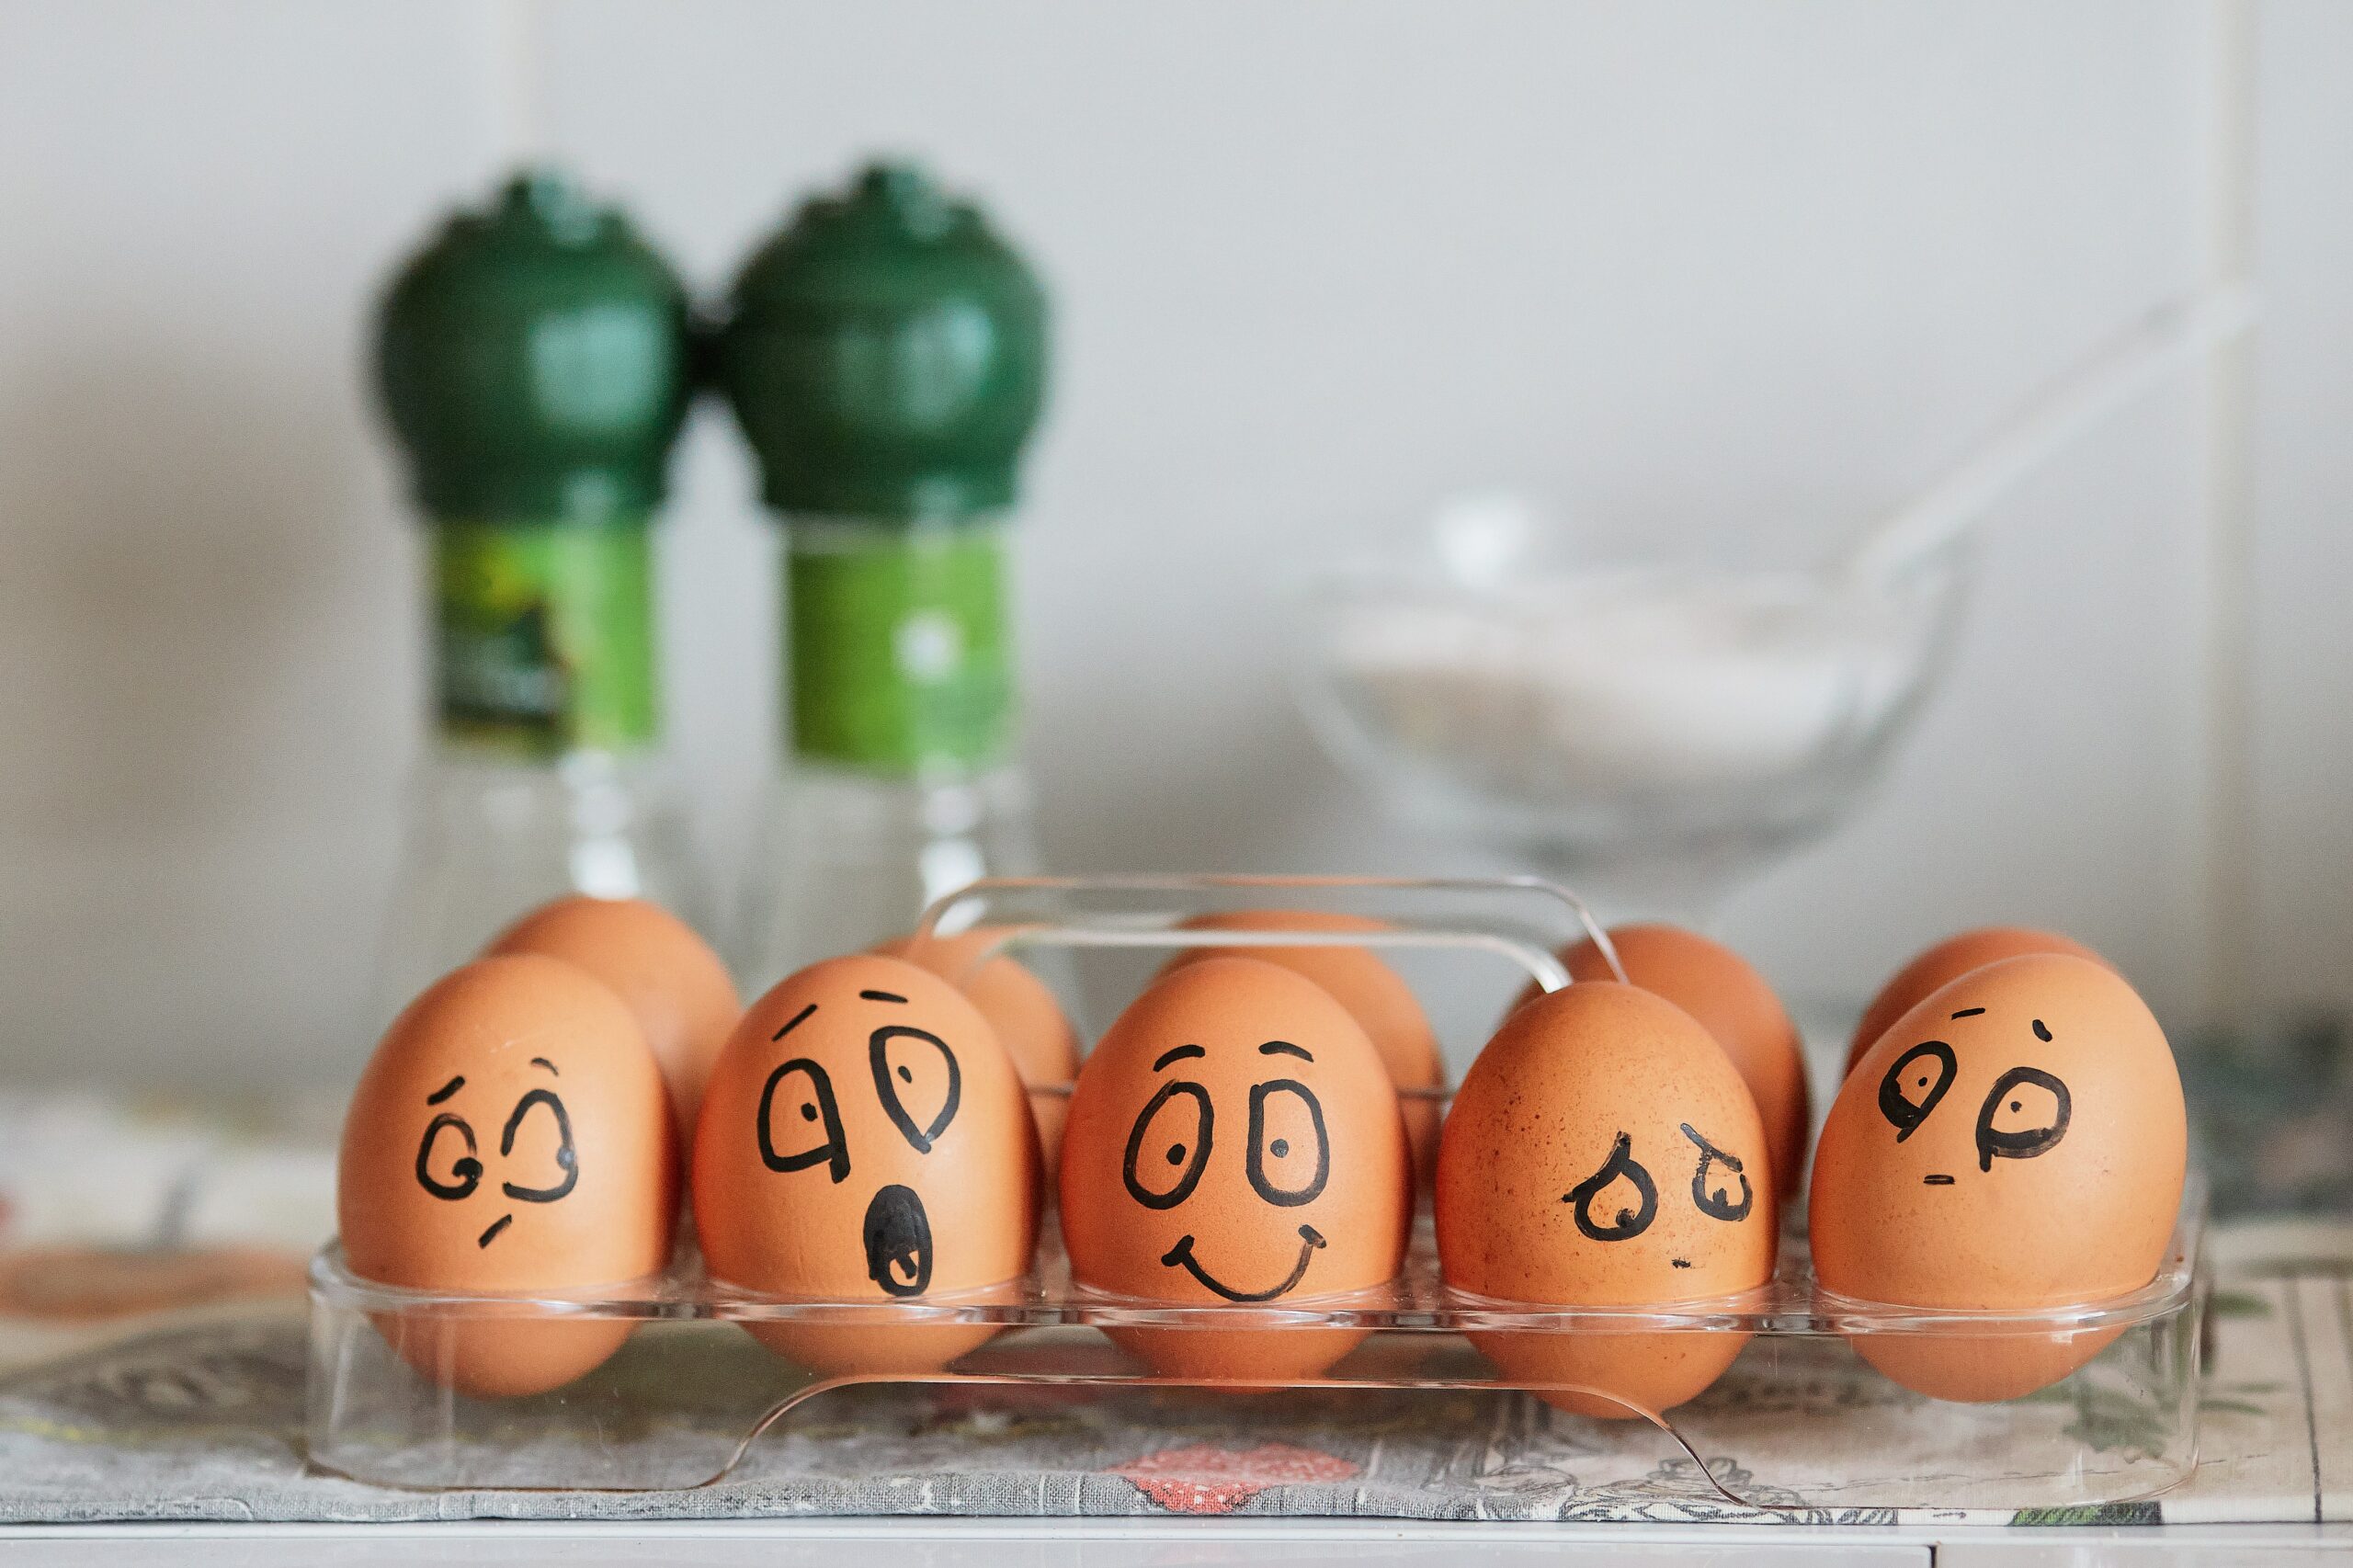 Spanish language: Do you know your eggs?